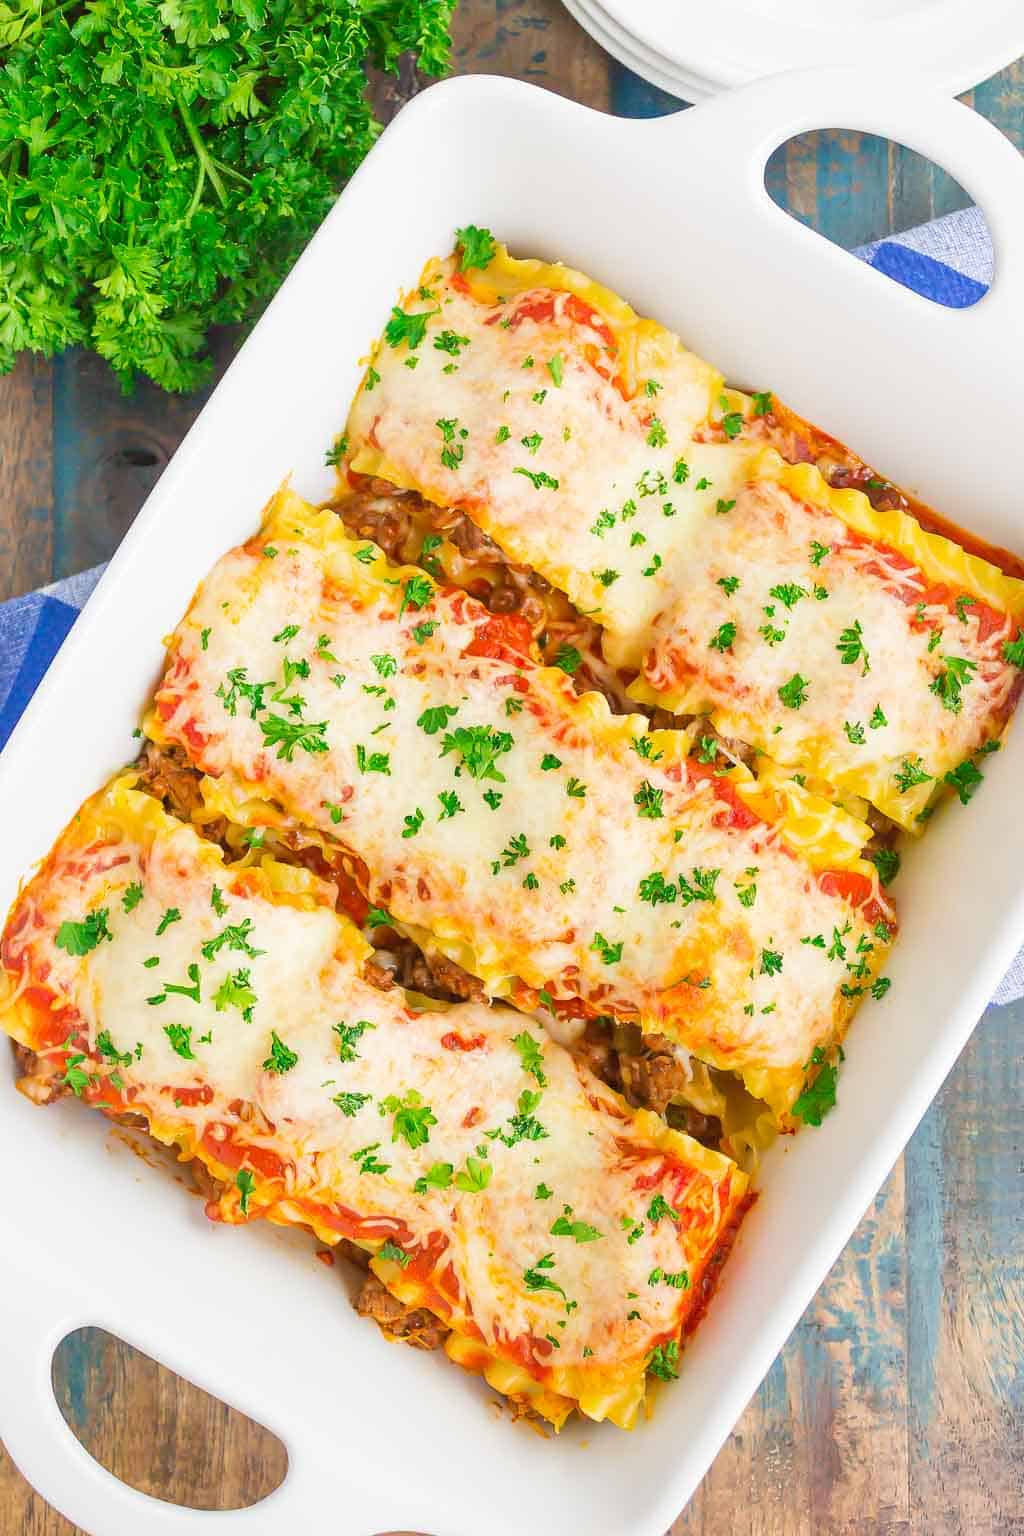 Easy Lasagna Rolls combine the classic flavors of lasagna, but without all of the prep work. With just a few ingredients, this hearty comfort dish is ready in 30 minutes!